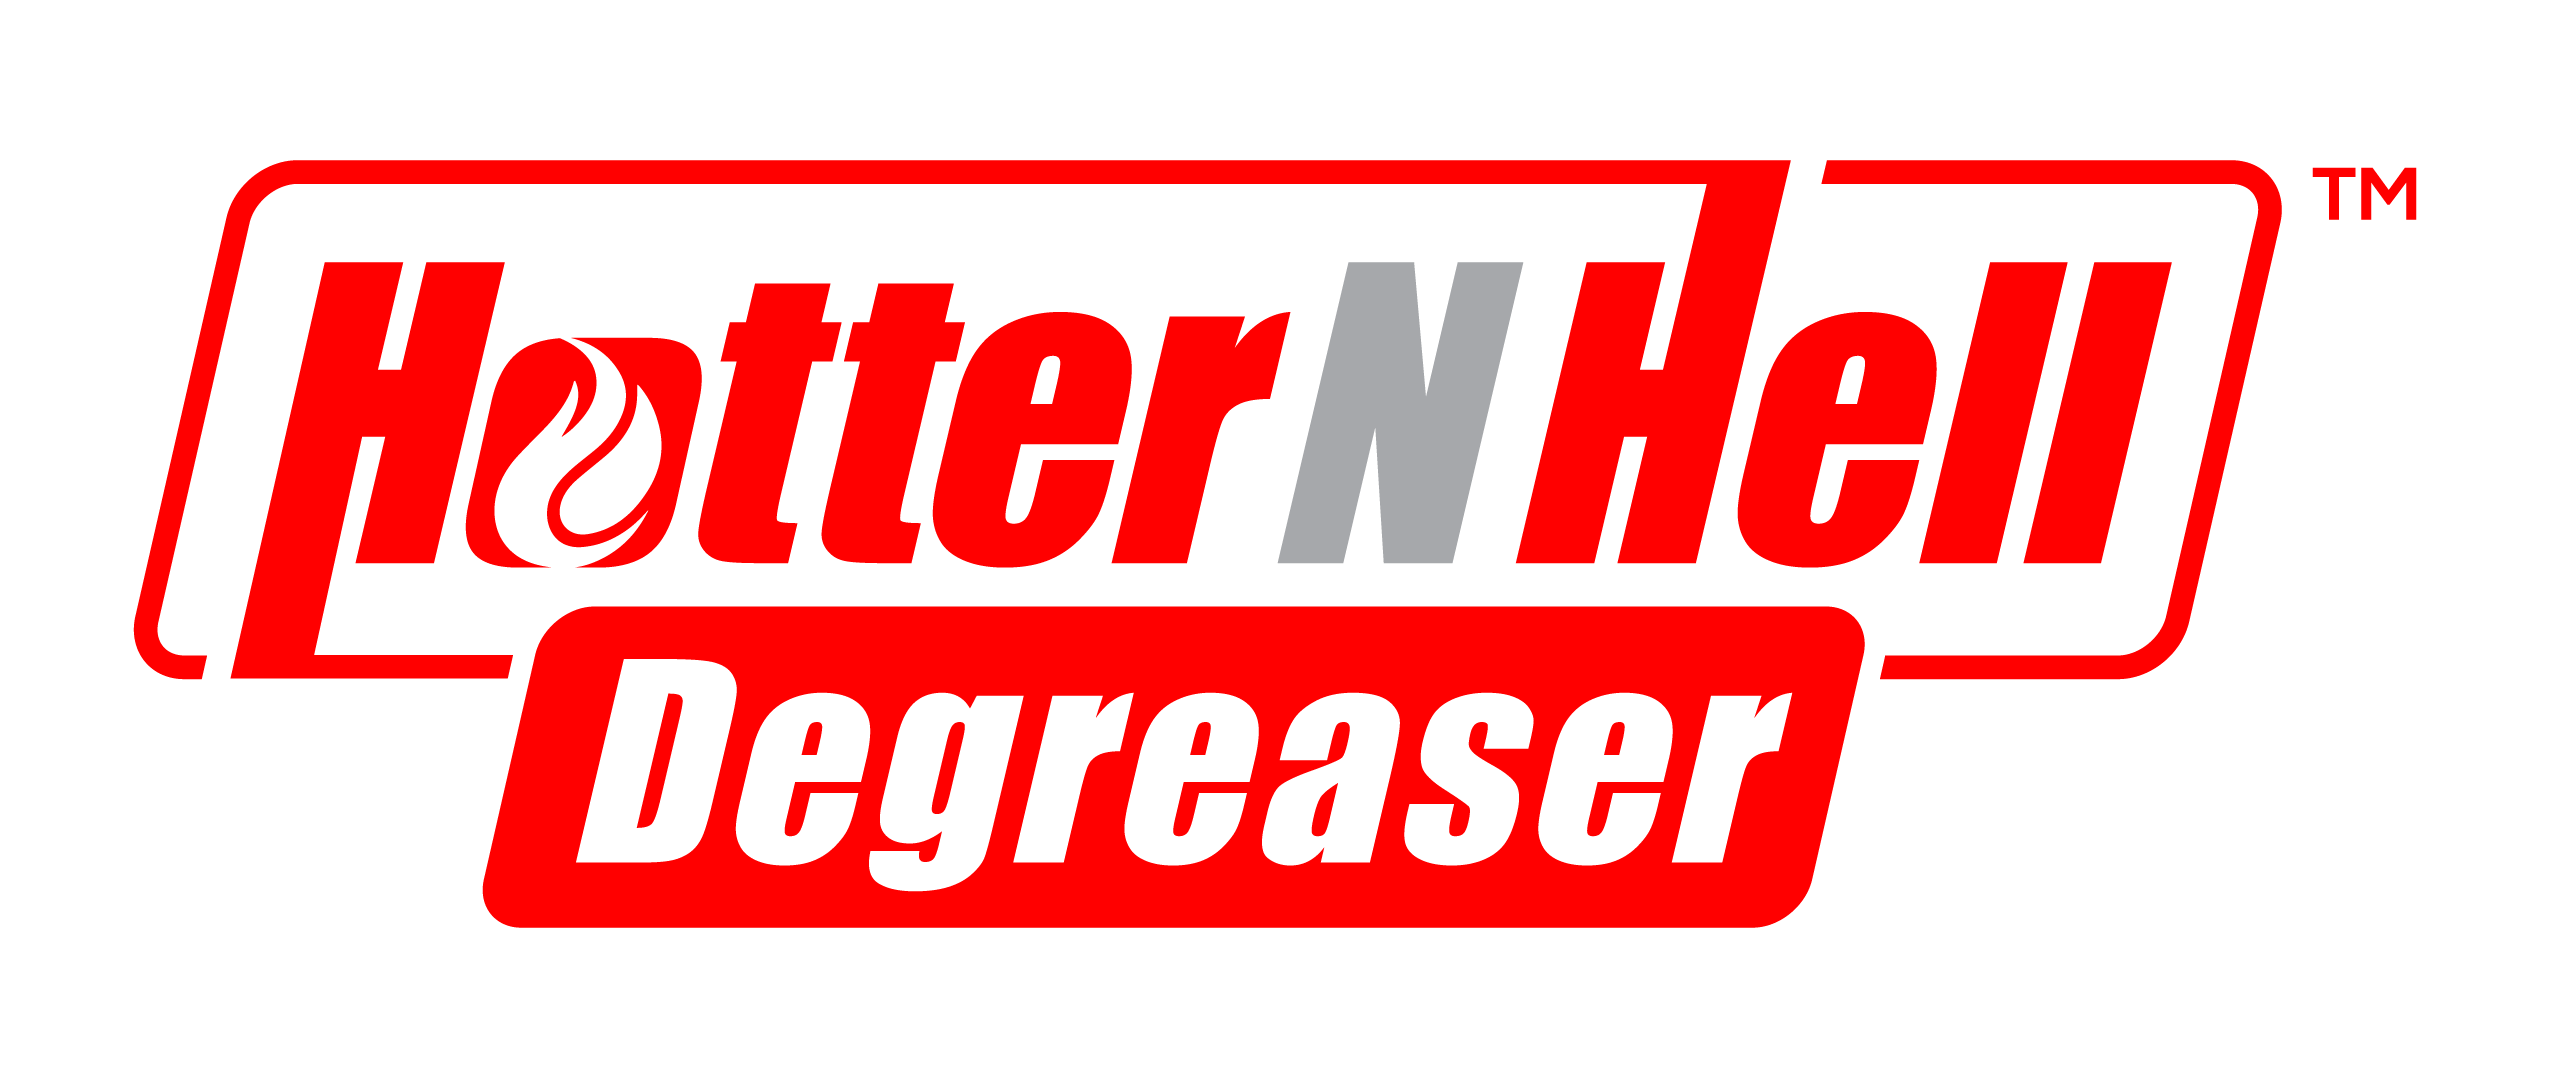 Hotter N Hell Degreaser Logo PNG 01